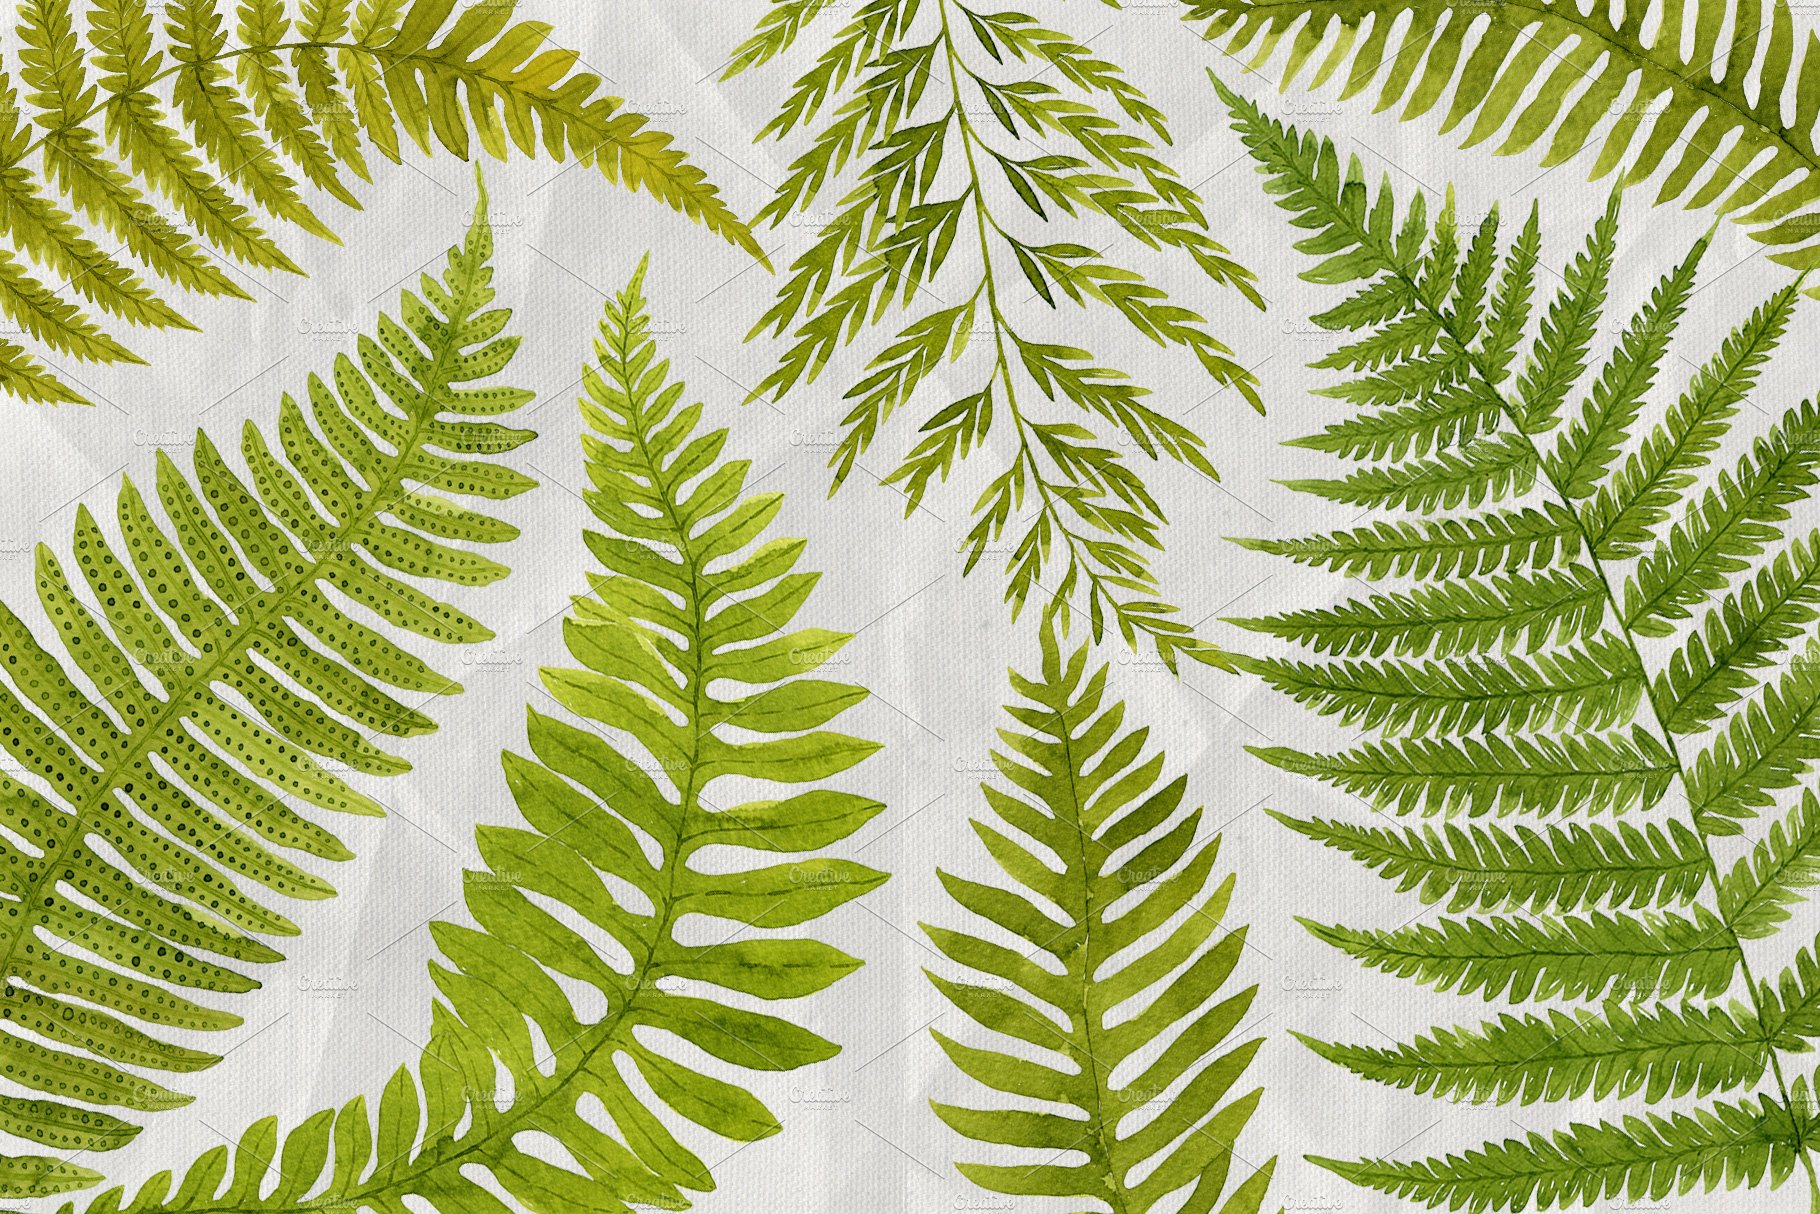 Bunch of green leaves on a white background.